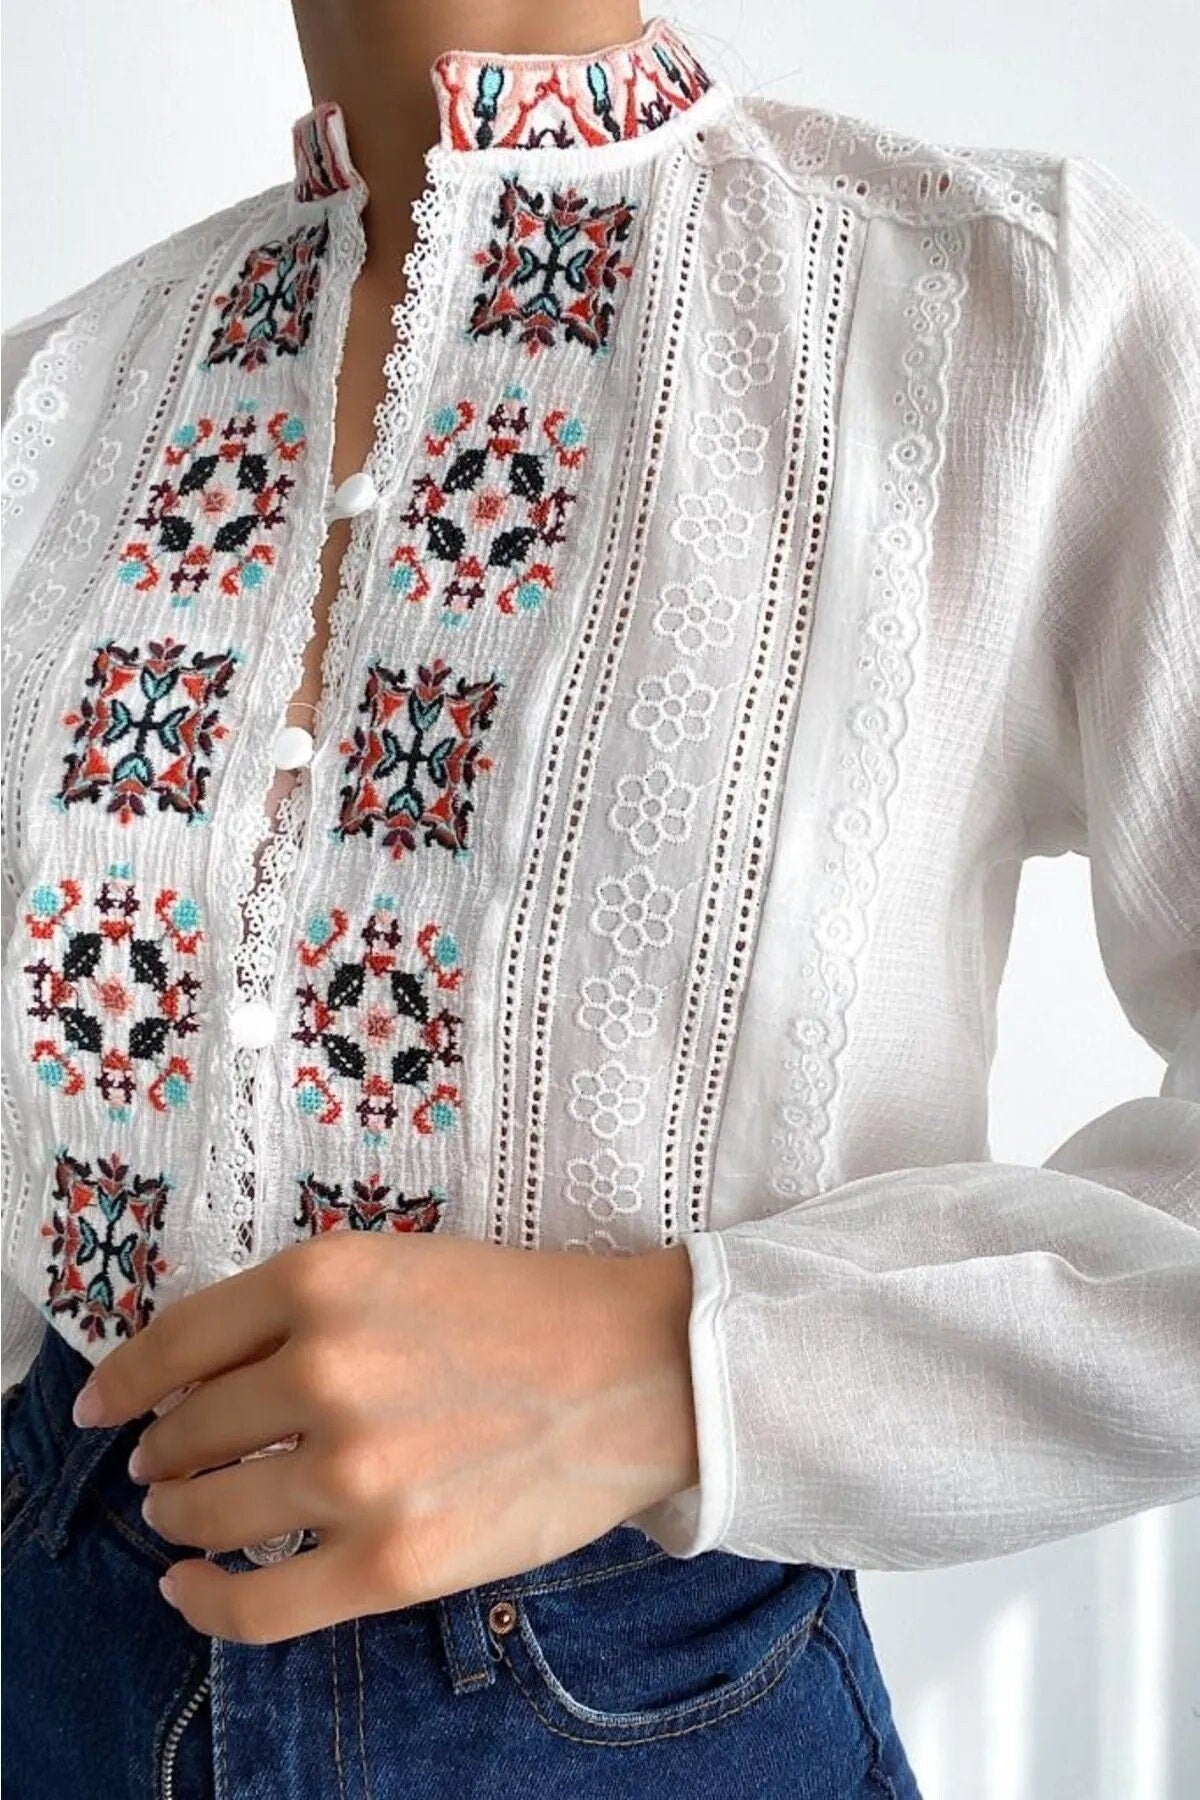 White Cross-stitch Embroidered Button And Lace Detailed Vintage Ethnic  Pattern Women's Blouse,Gift For Her,Boho Blouse,Vintage Blouse